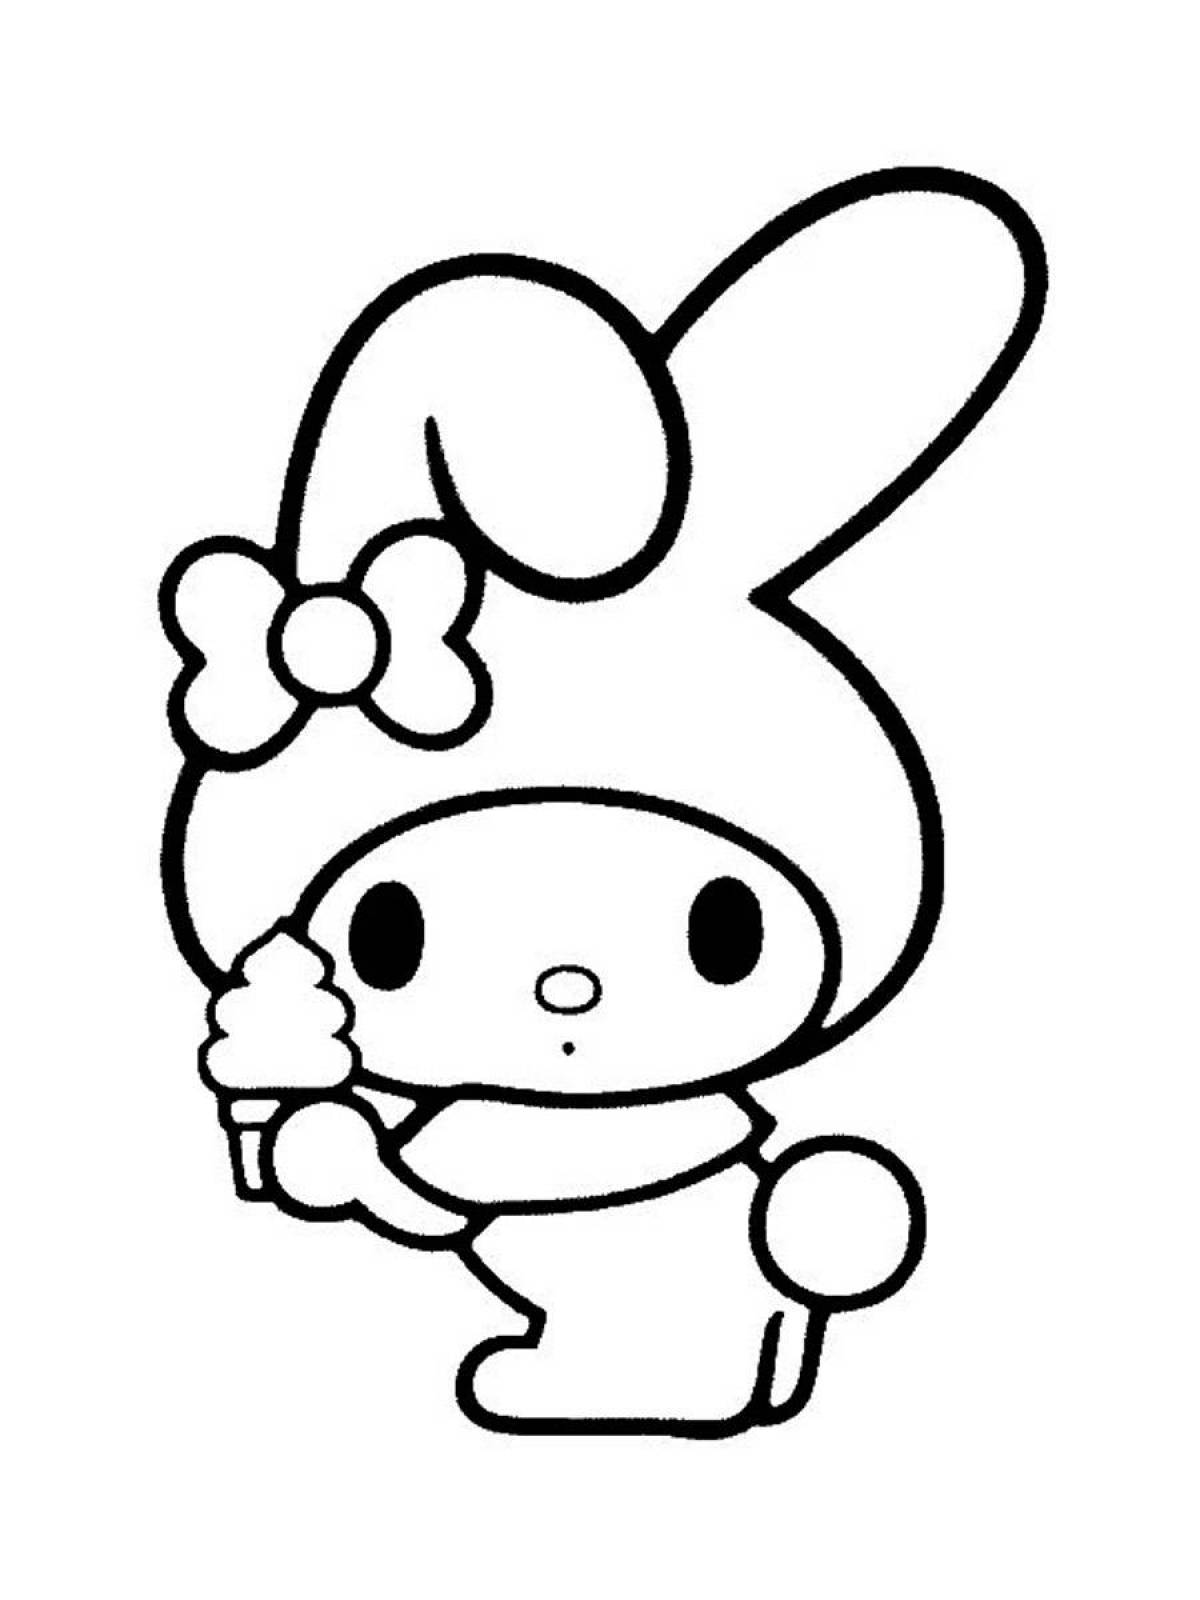 Kuromi and hello kitty colorful coloring page